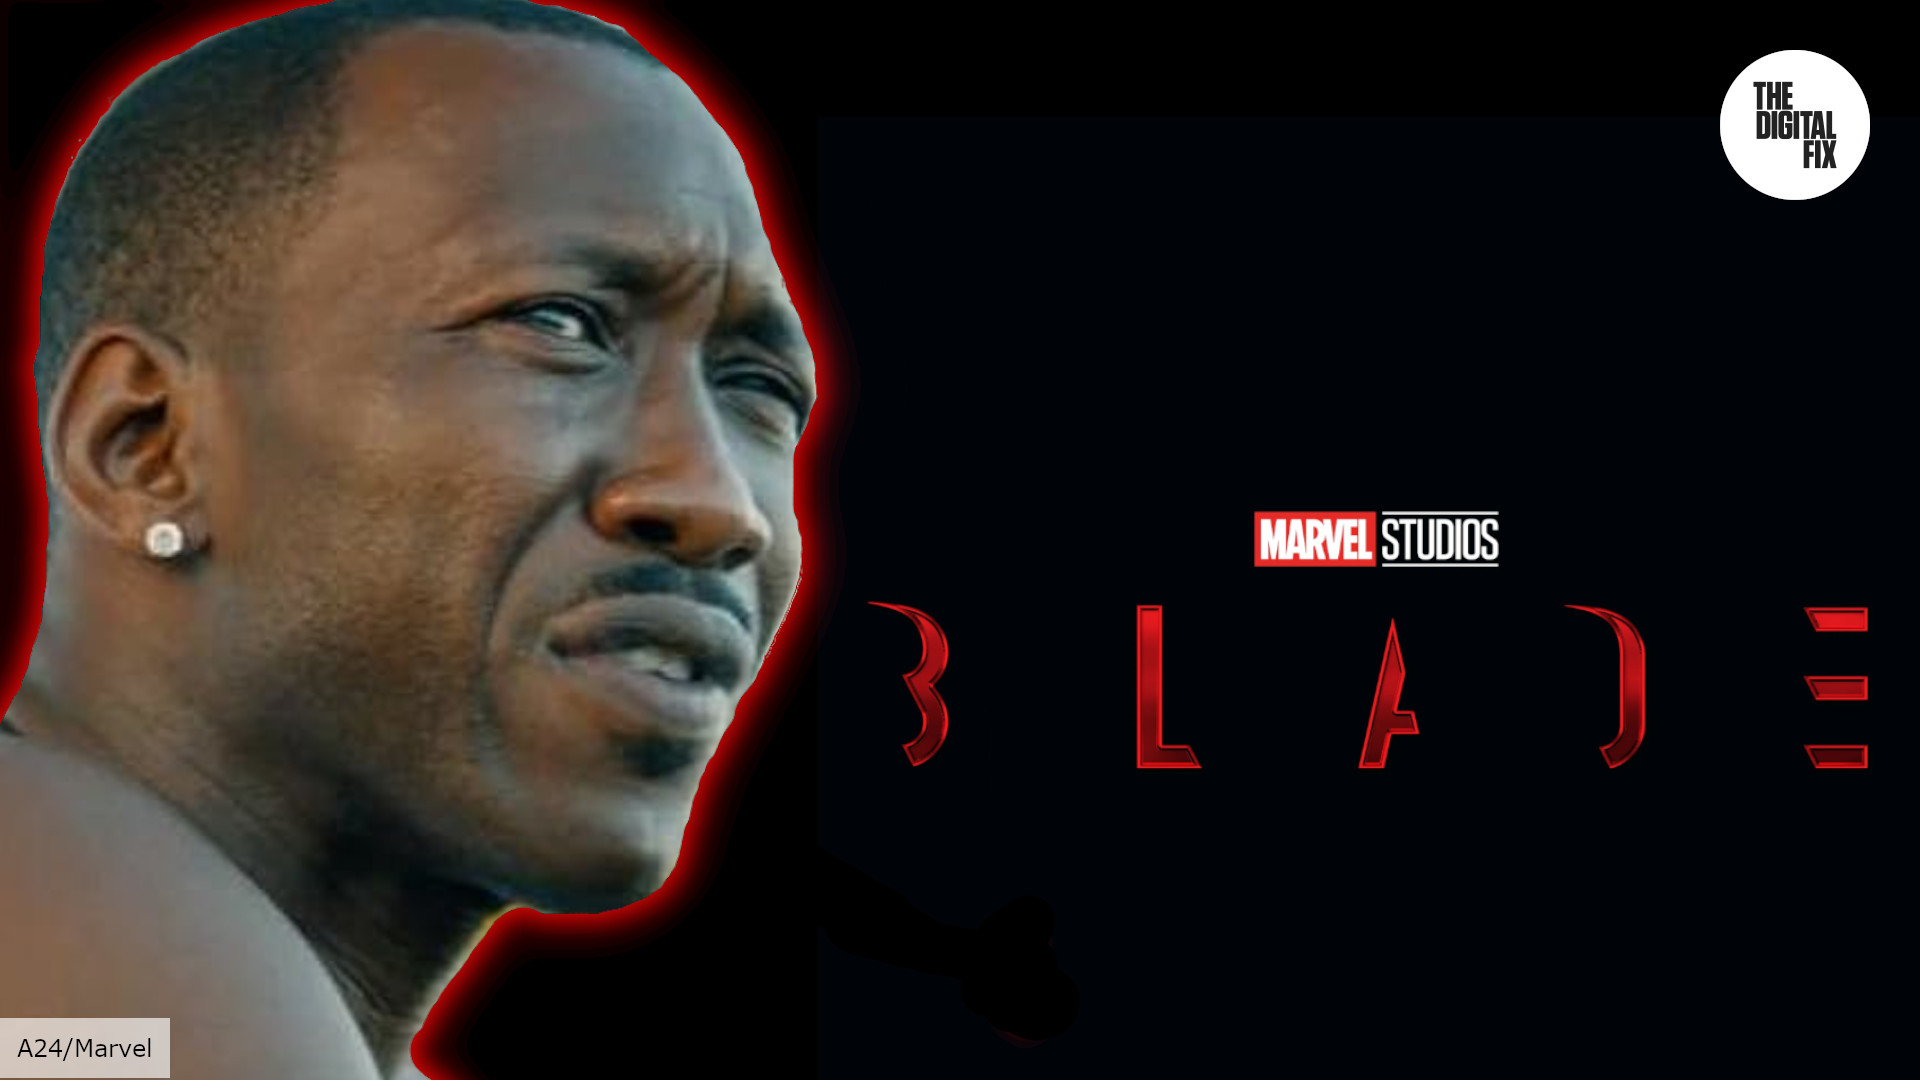 MCU Blade release date, cast, plot, trailer, and more news The